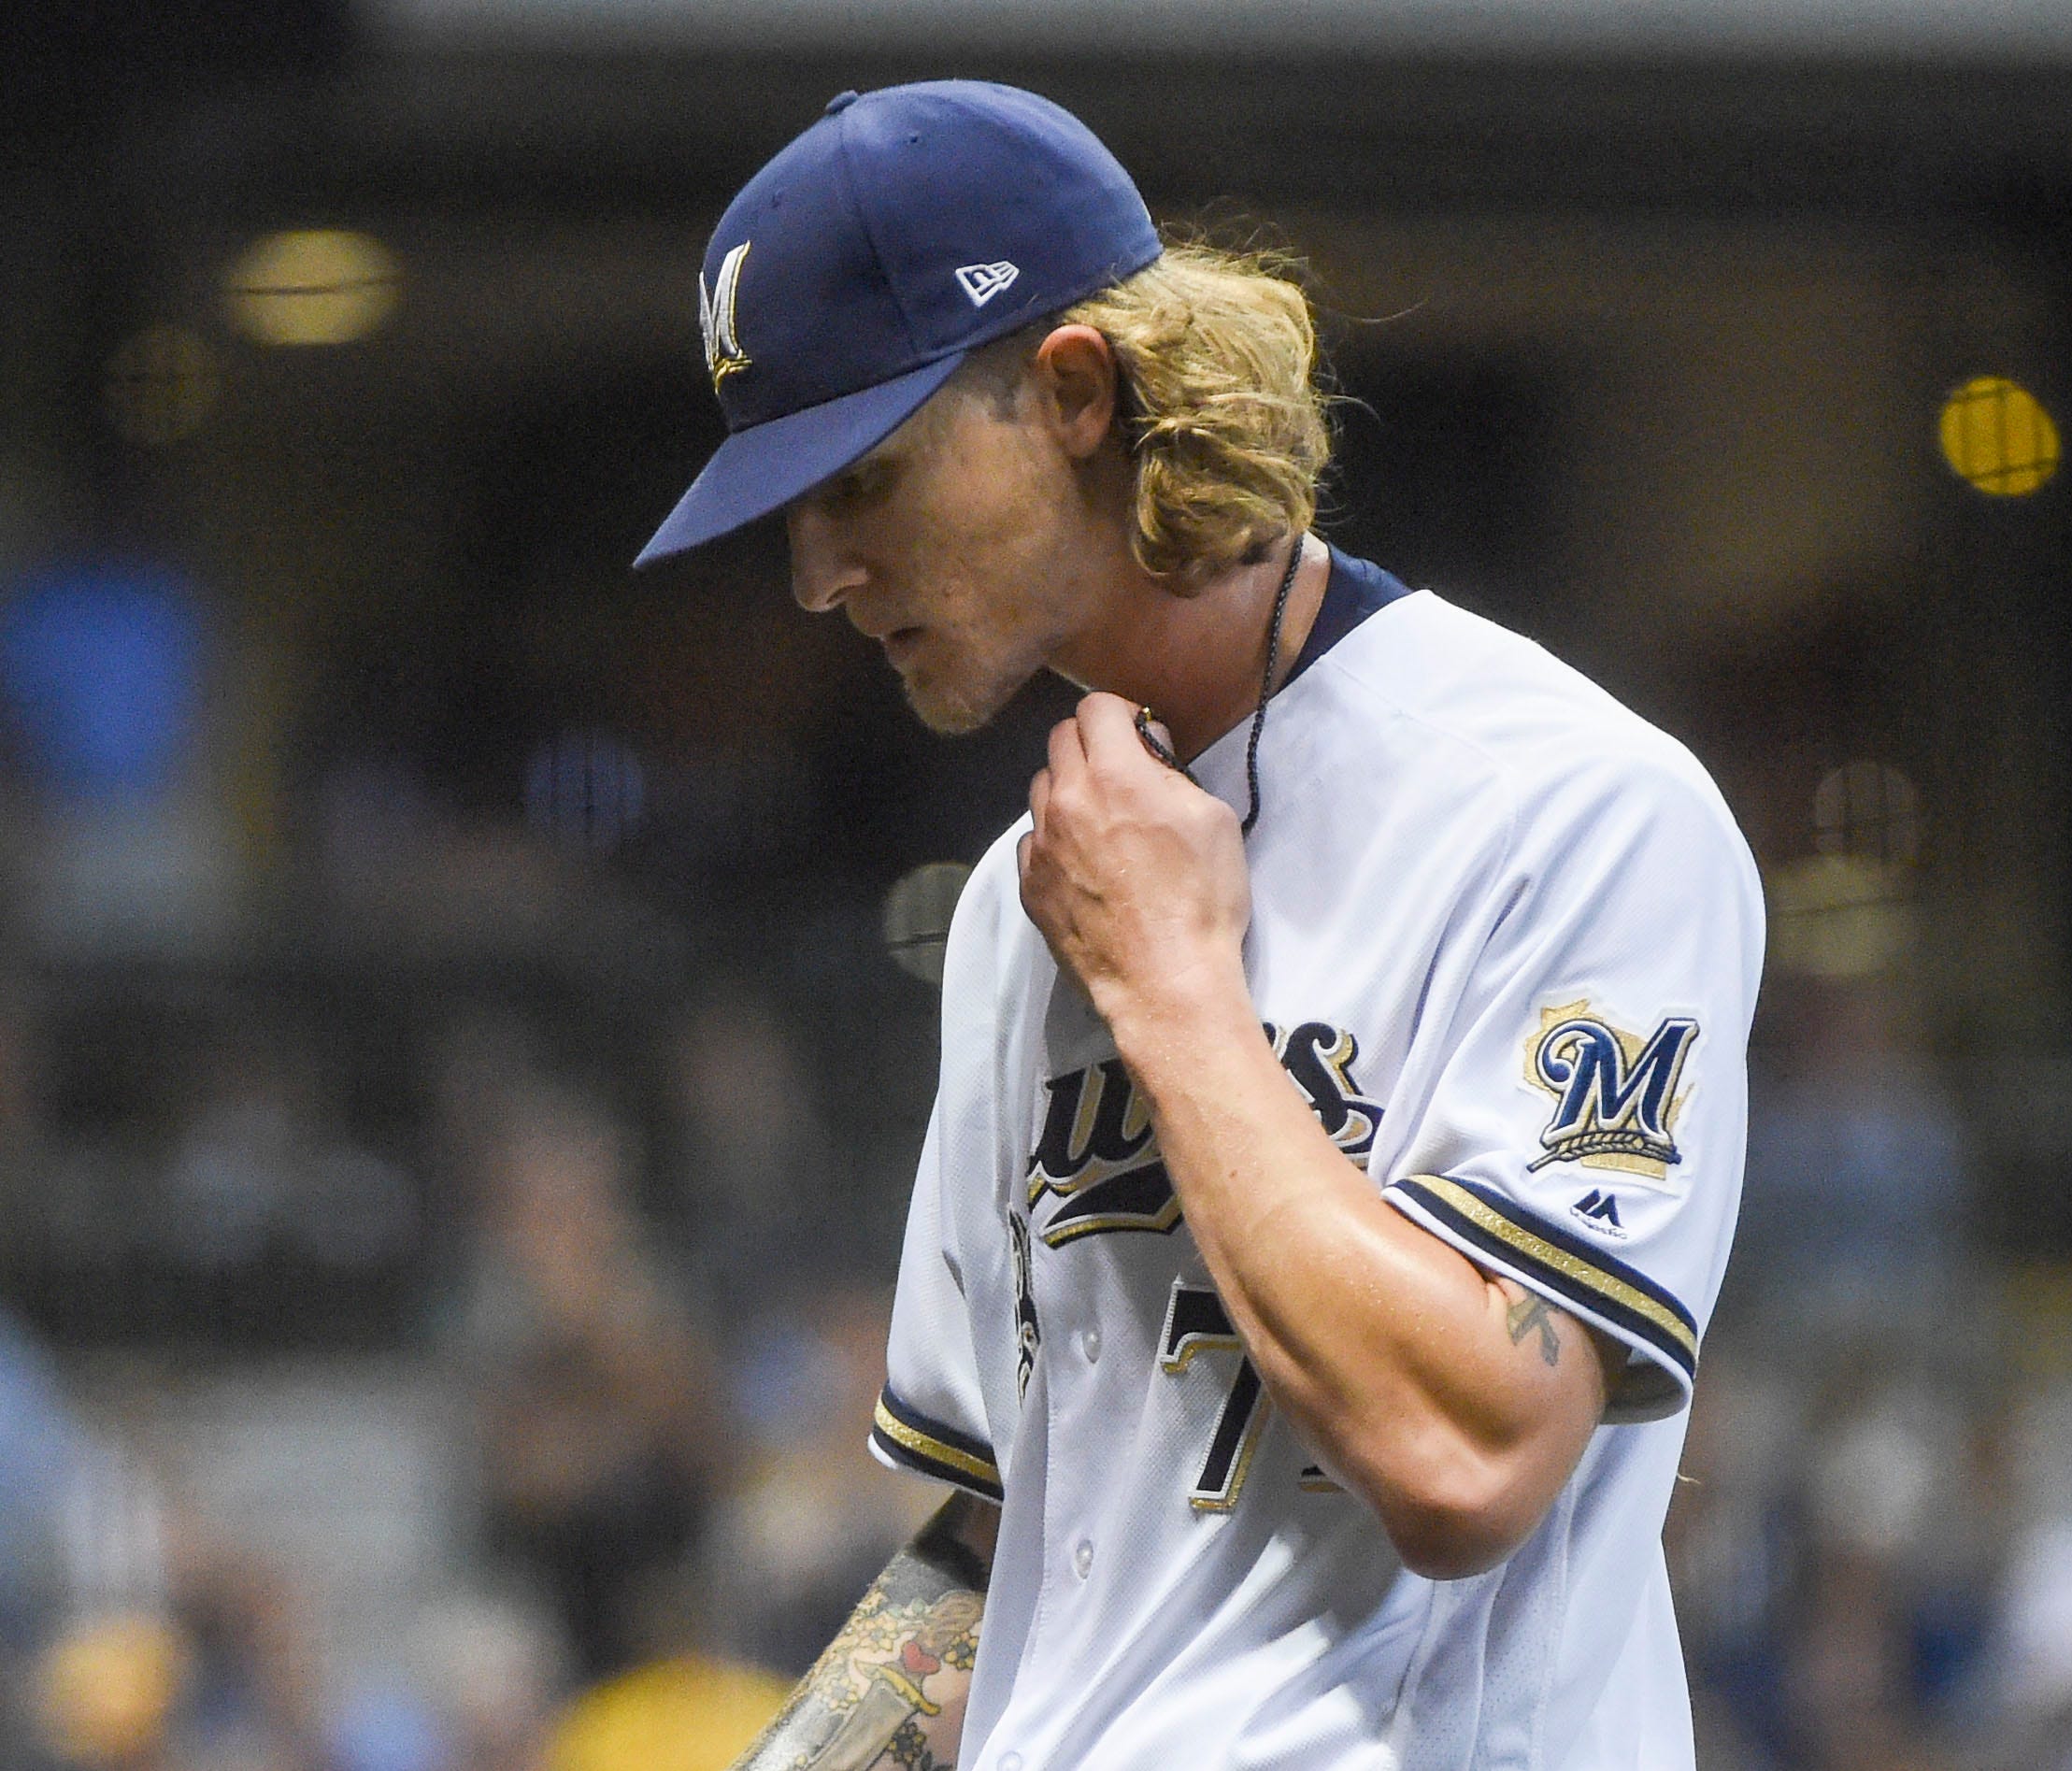 Milwaukee Brewers pitcher Josh Hader (71) walks back to the dugout after pitching the seventh inning against the Los Angeles Dodgers at Miller Park.